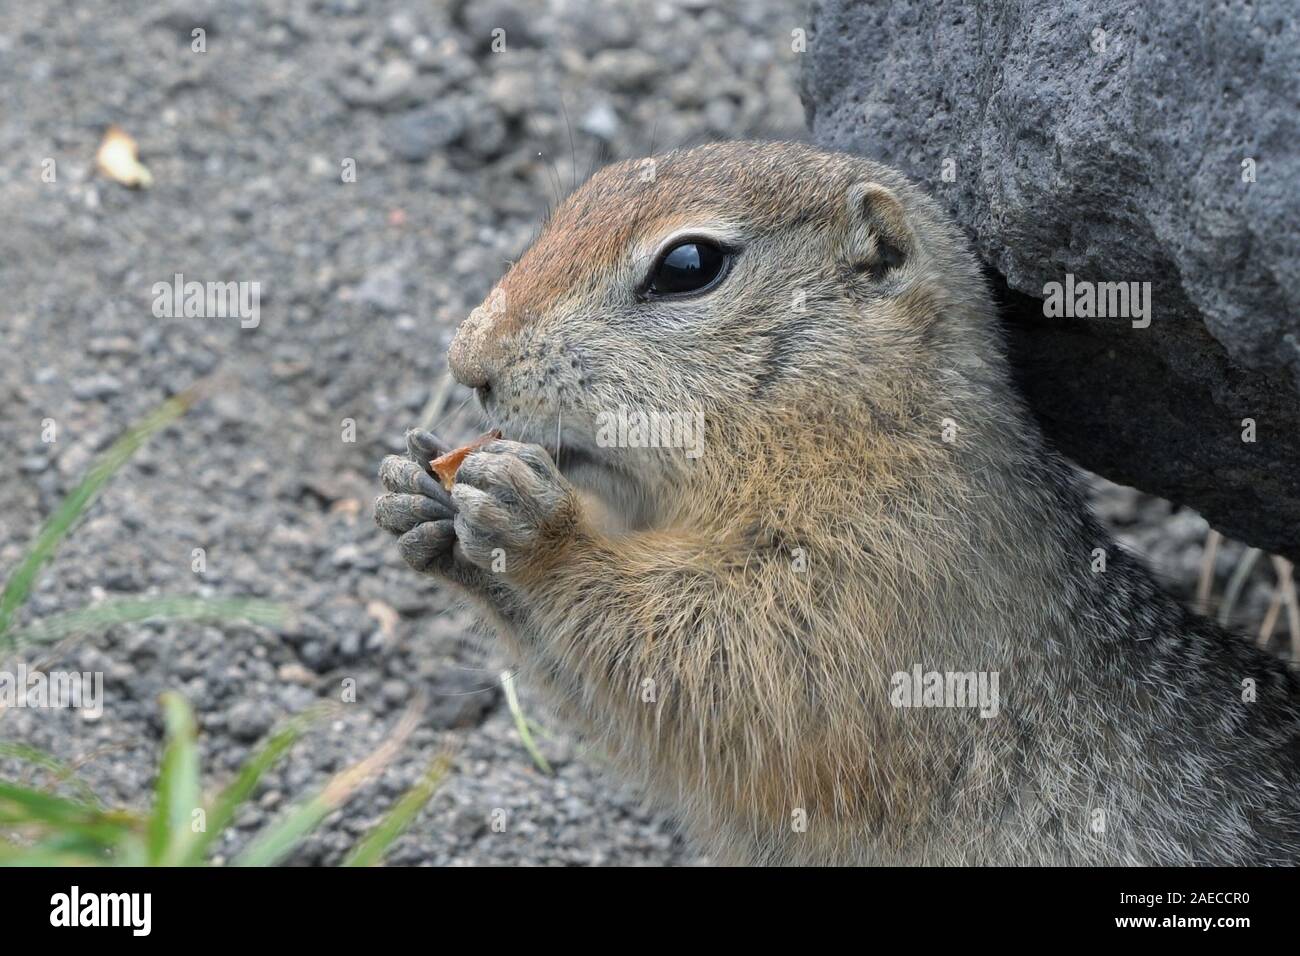 Cute Arctic ground squirrel eating cracker holding food in paws ...